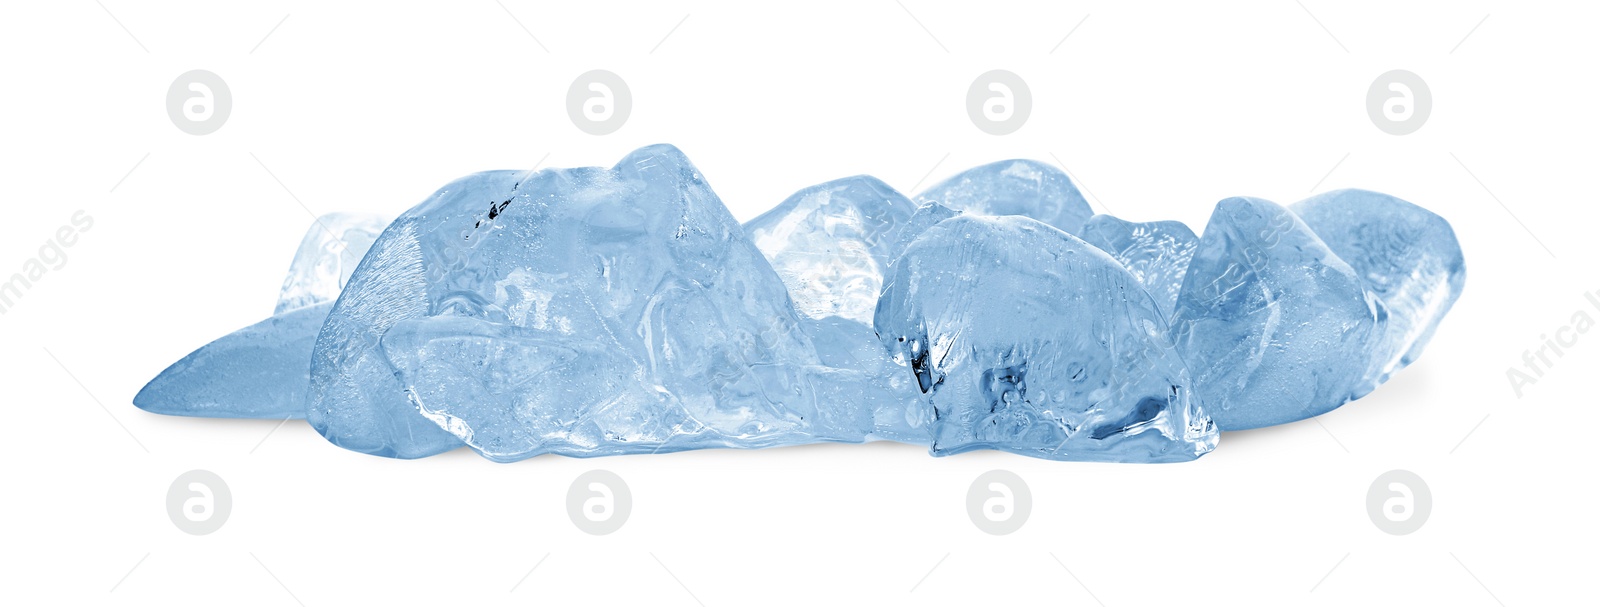 Photo of Pieces of crushed ice isolated on white